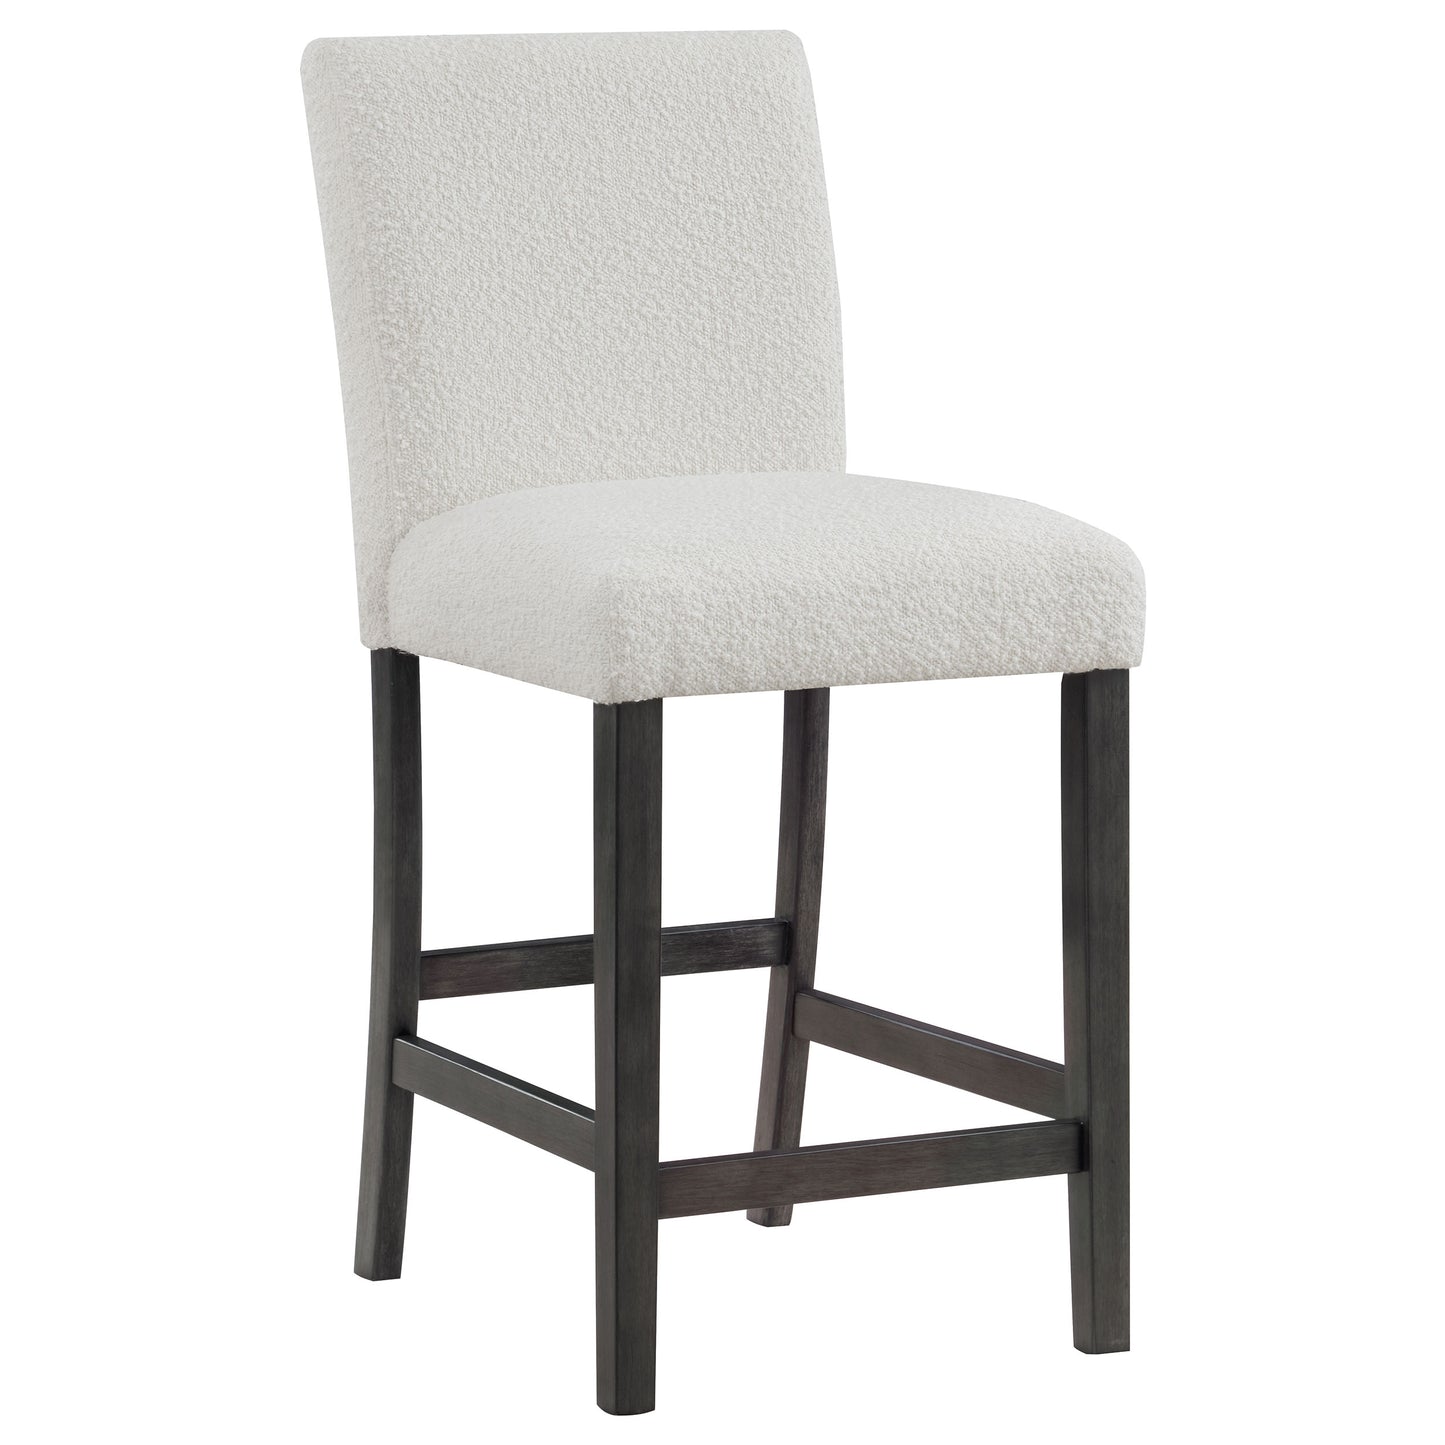 Alba Boucle Upholstered Counter Height Dining Chair White and Charcoal Grey (Set of 2)